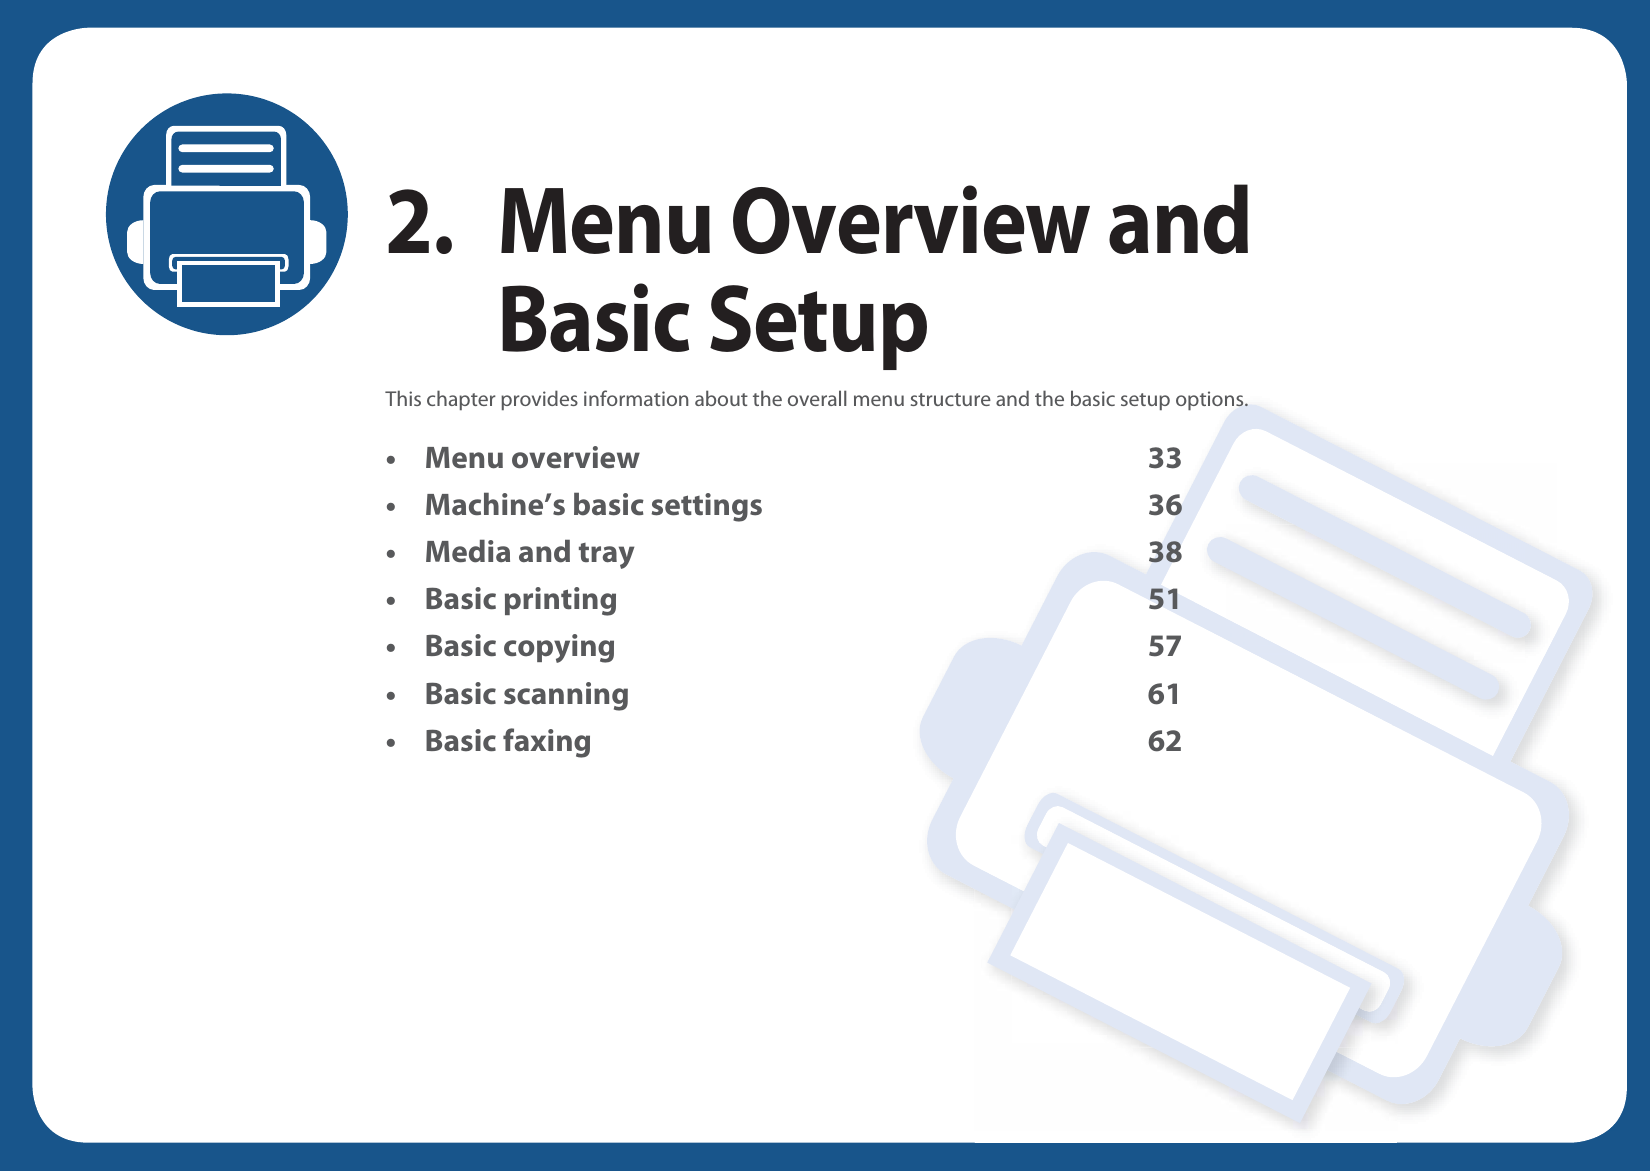 2. Menu Overview and Basic SetupThis chapter provides information about the overall menu structure and the basic setup options.• Menu overview 33• Machine’s basic settings 36• Media and tray 38• Basic printing 51• Basic copying 57• Basic scanning 61• Basic faxing 62